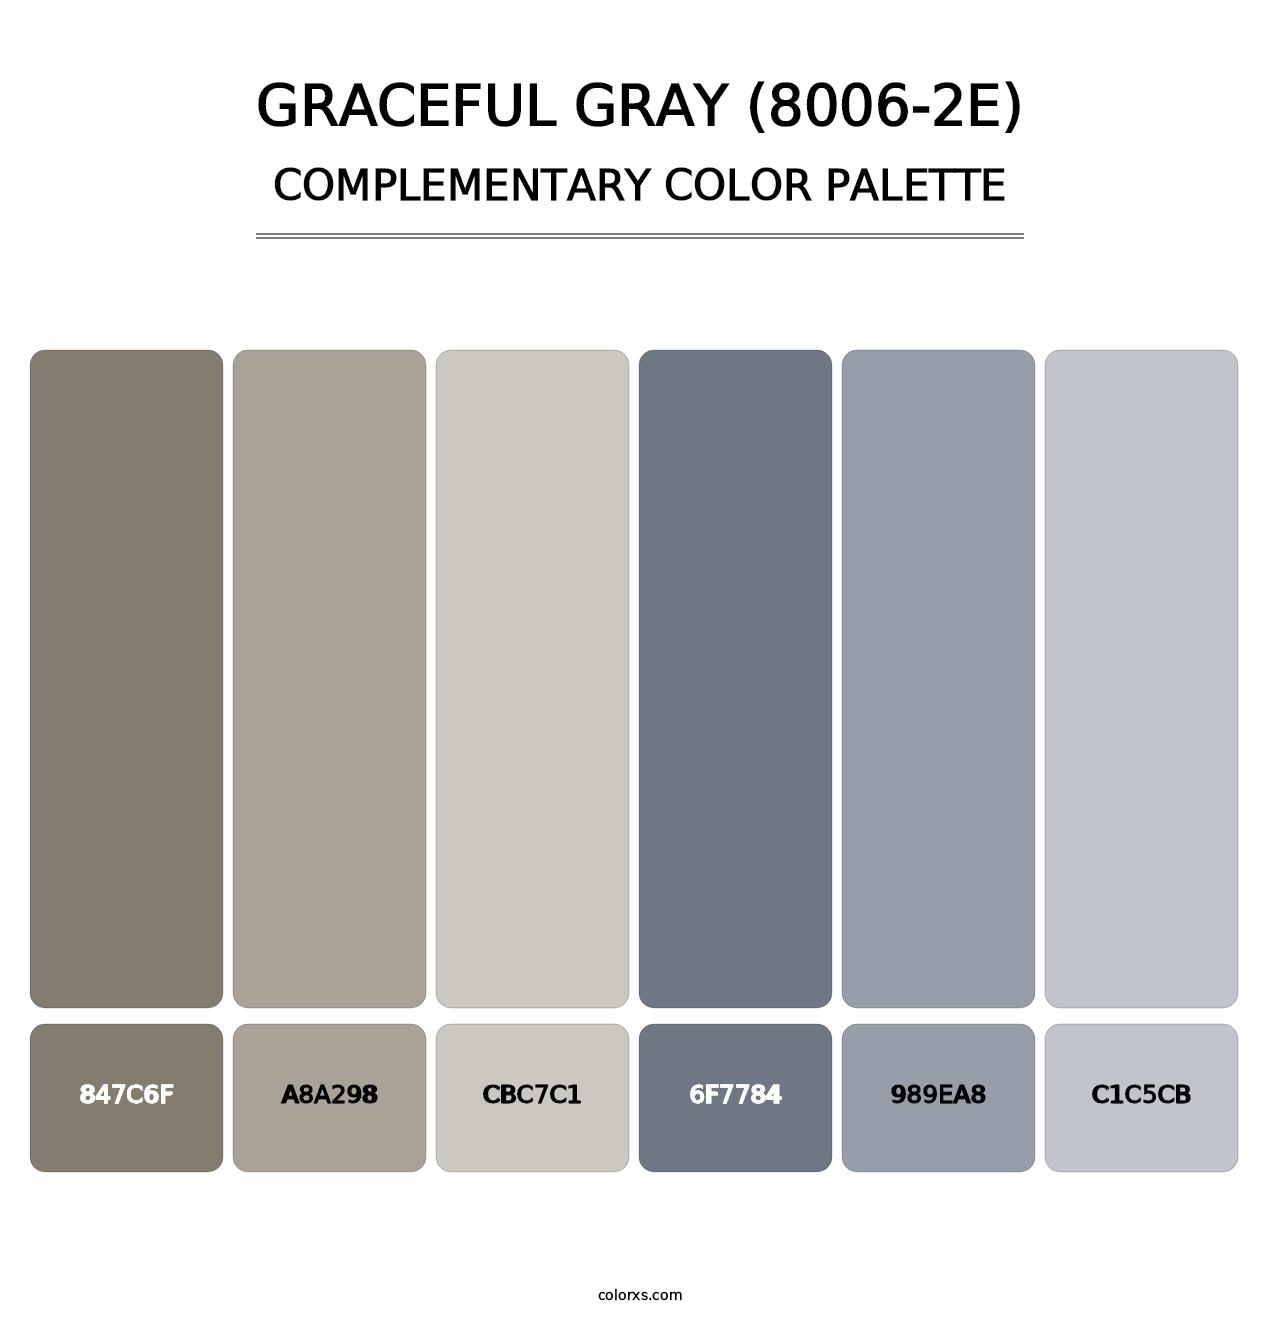 Graceful Gray (8006-2E) - Complementary Color Palette